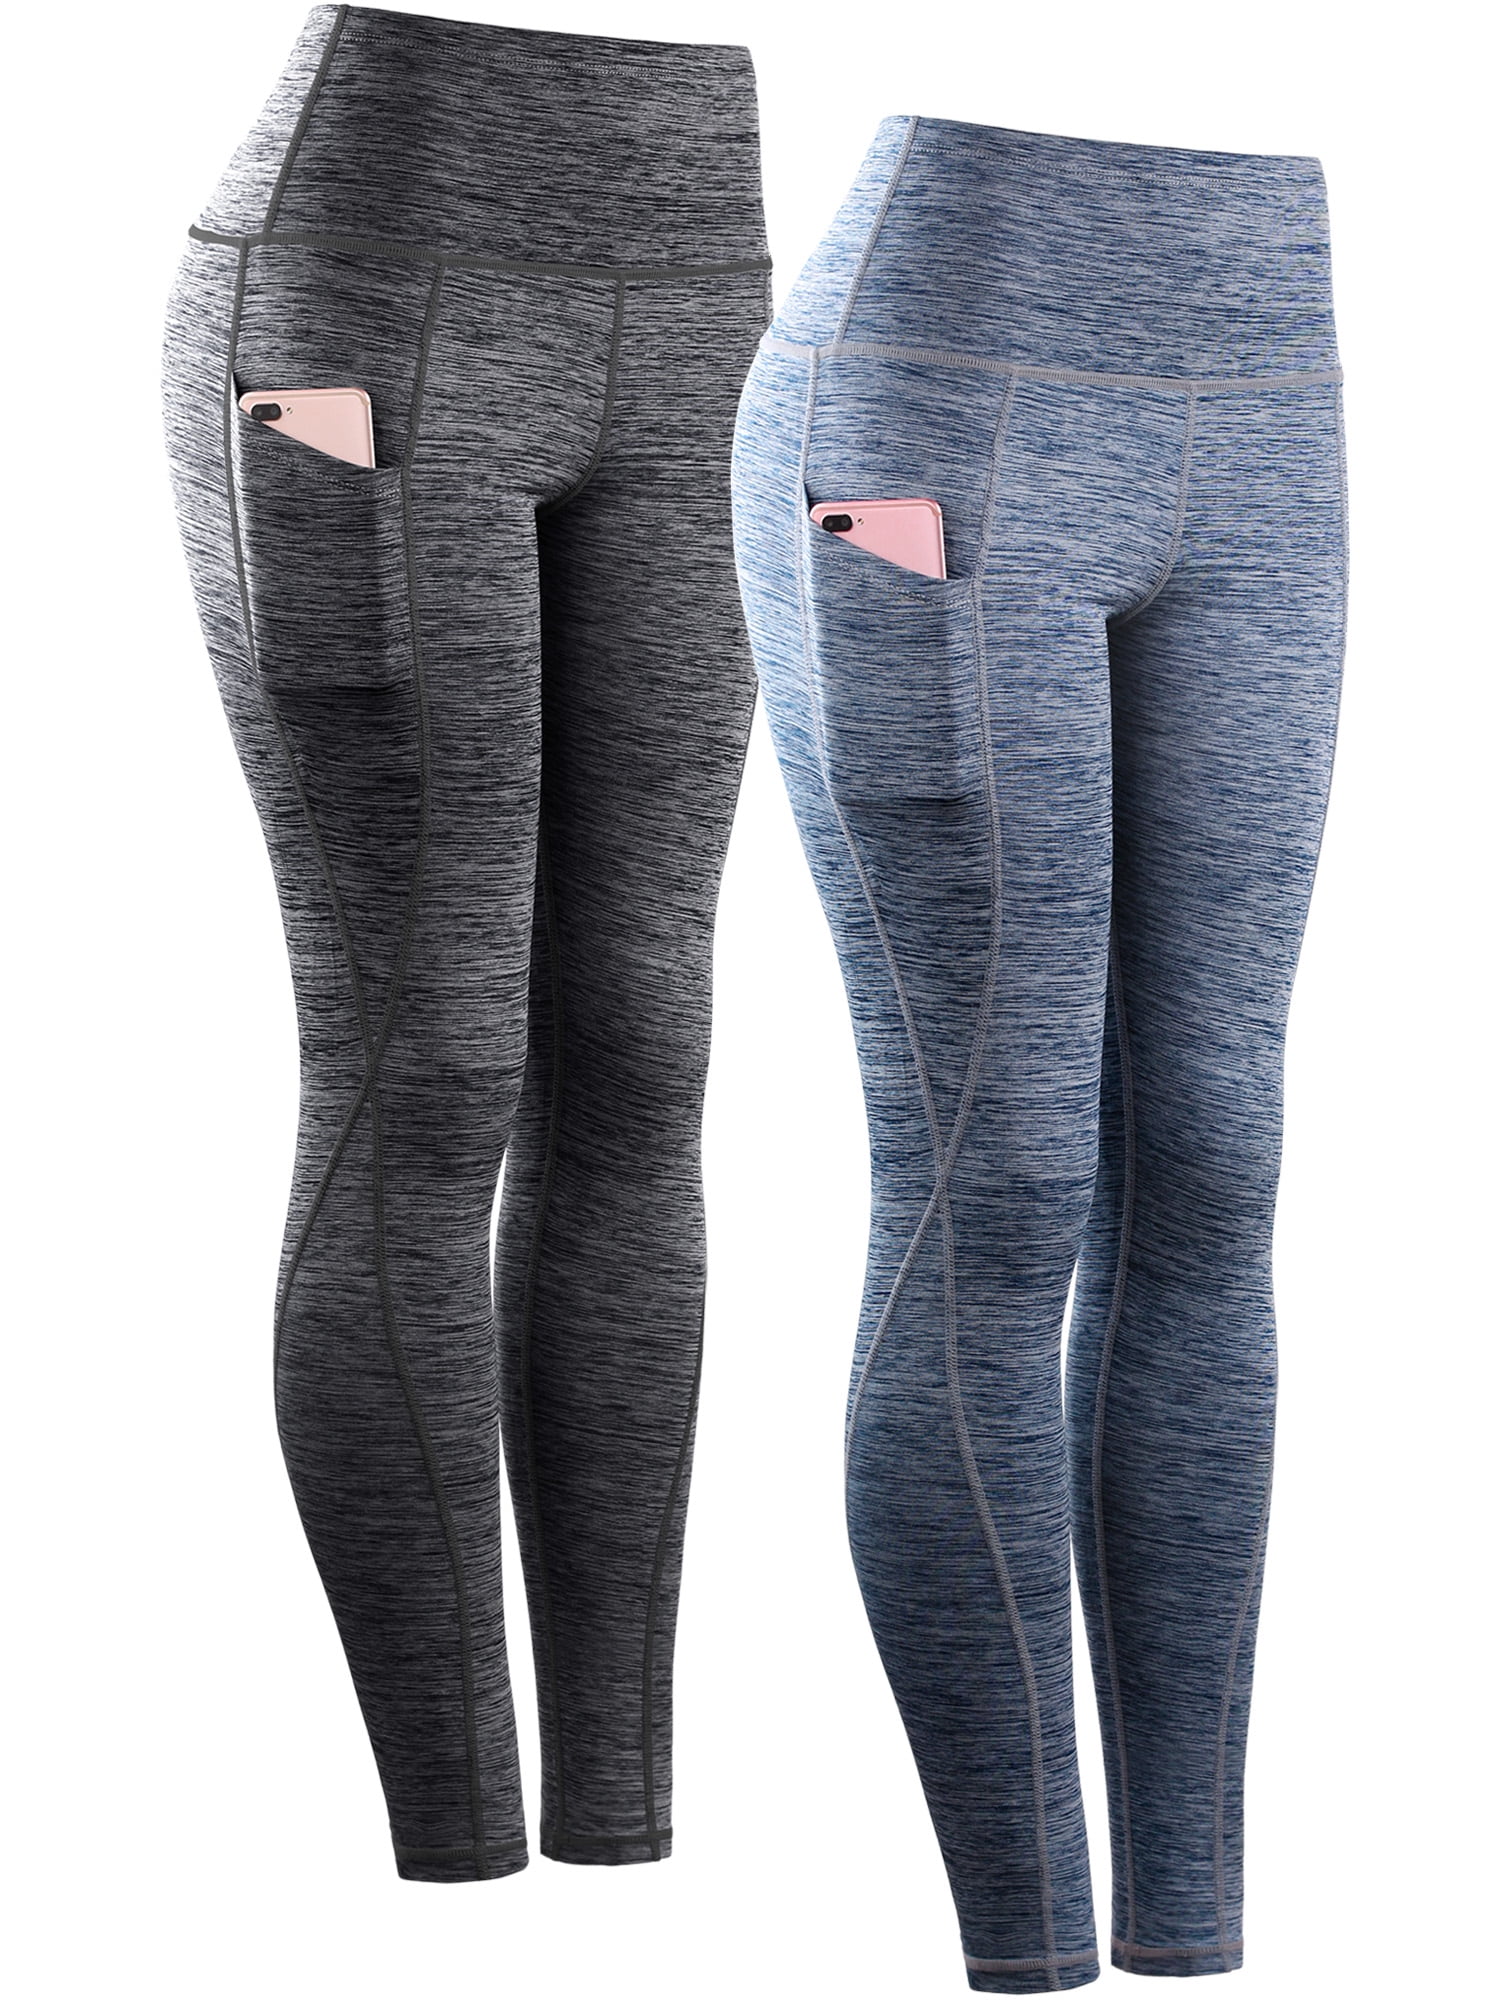 High Waisted Yoga Gym Leggings With Pockets For Women With Pockets Tummy  Control, Non See Through, Athletic Running Pants From Dhzheng, $13.42